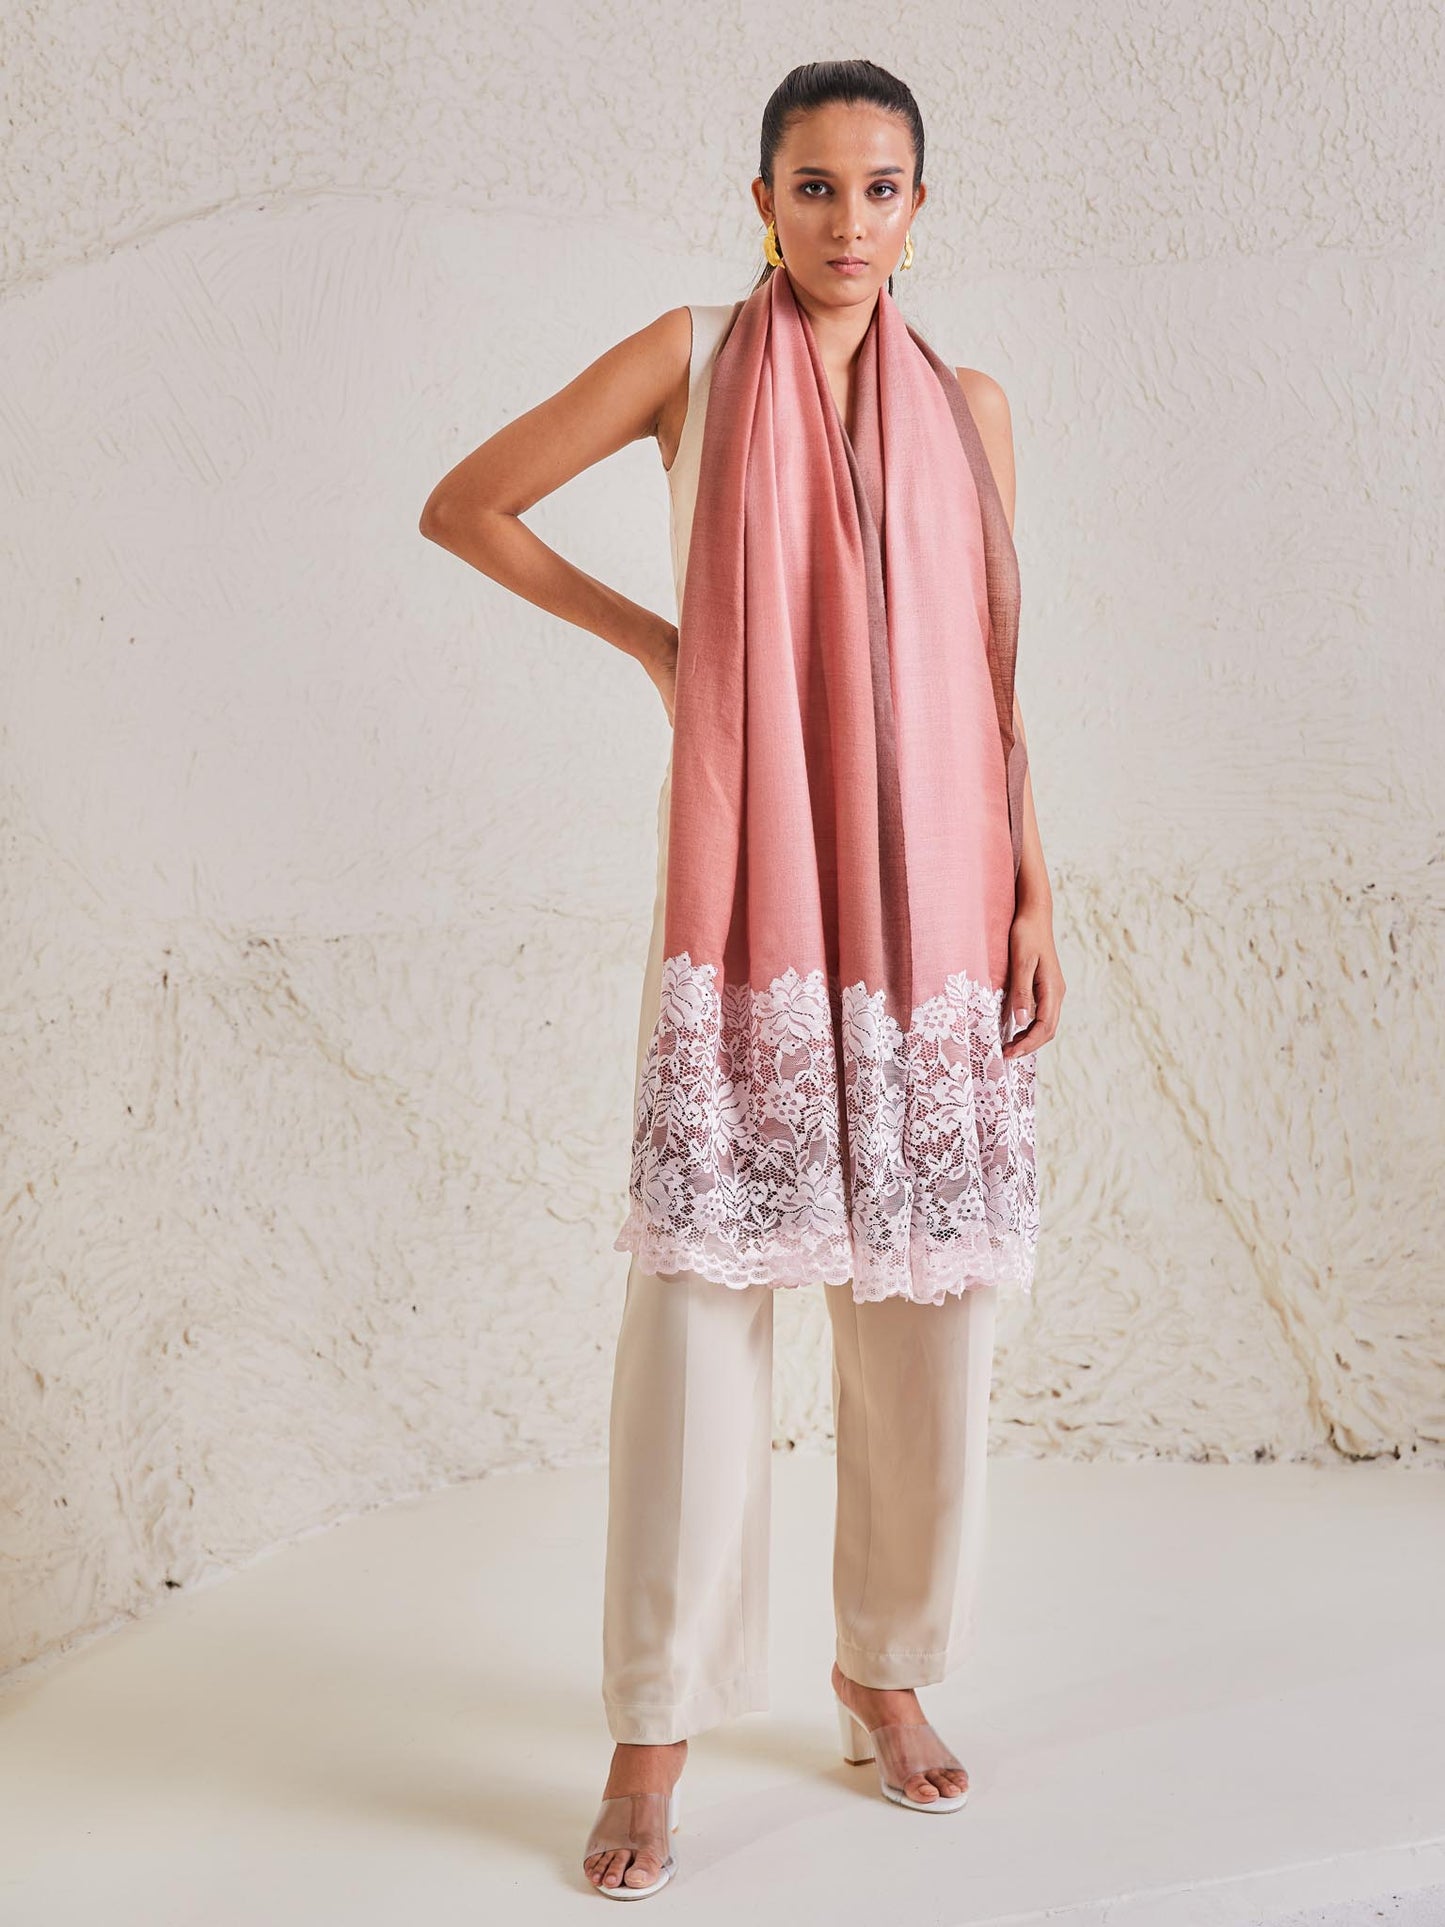 Model is wearing the Celestial Chantilly Pashmina Stole from shaza in pink-brown ombre.